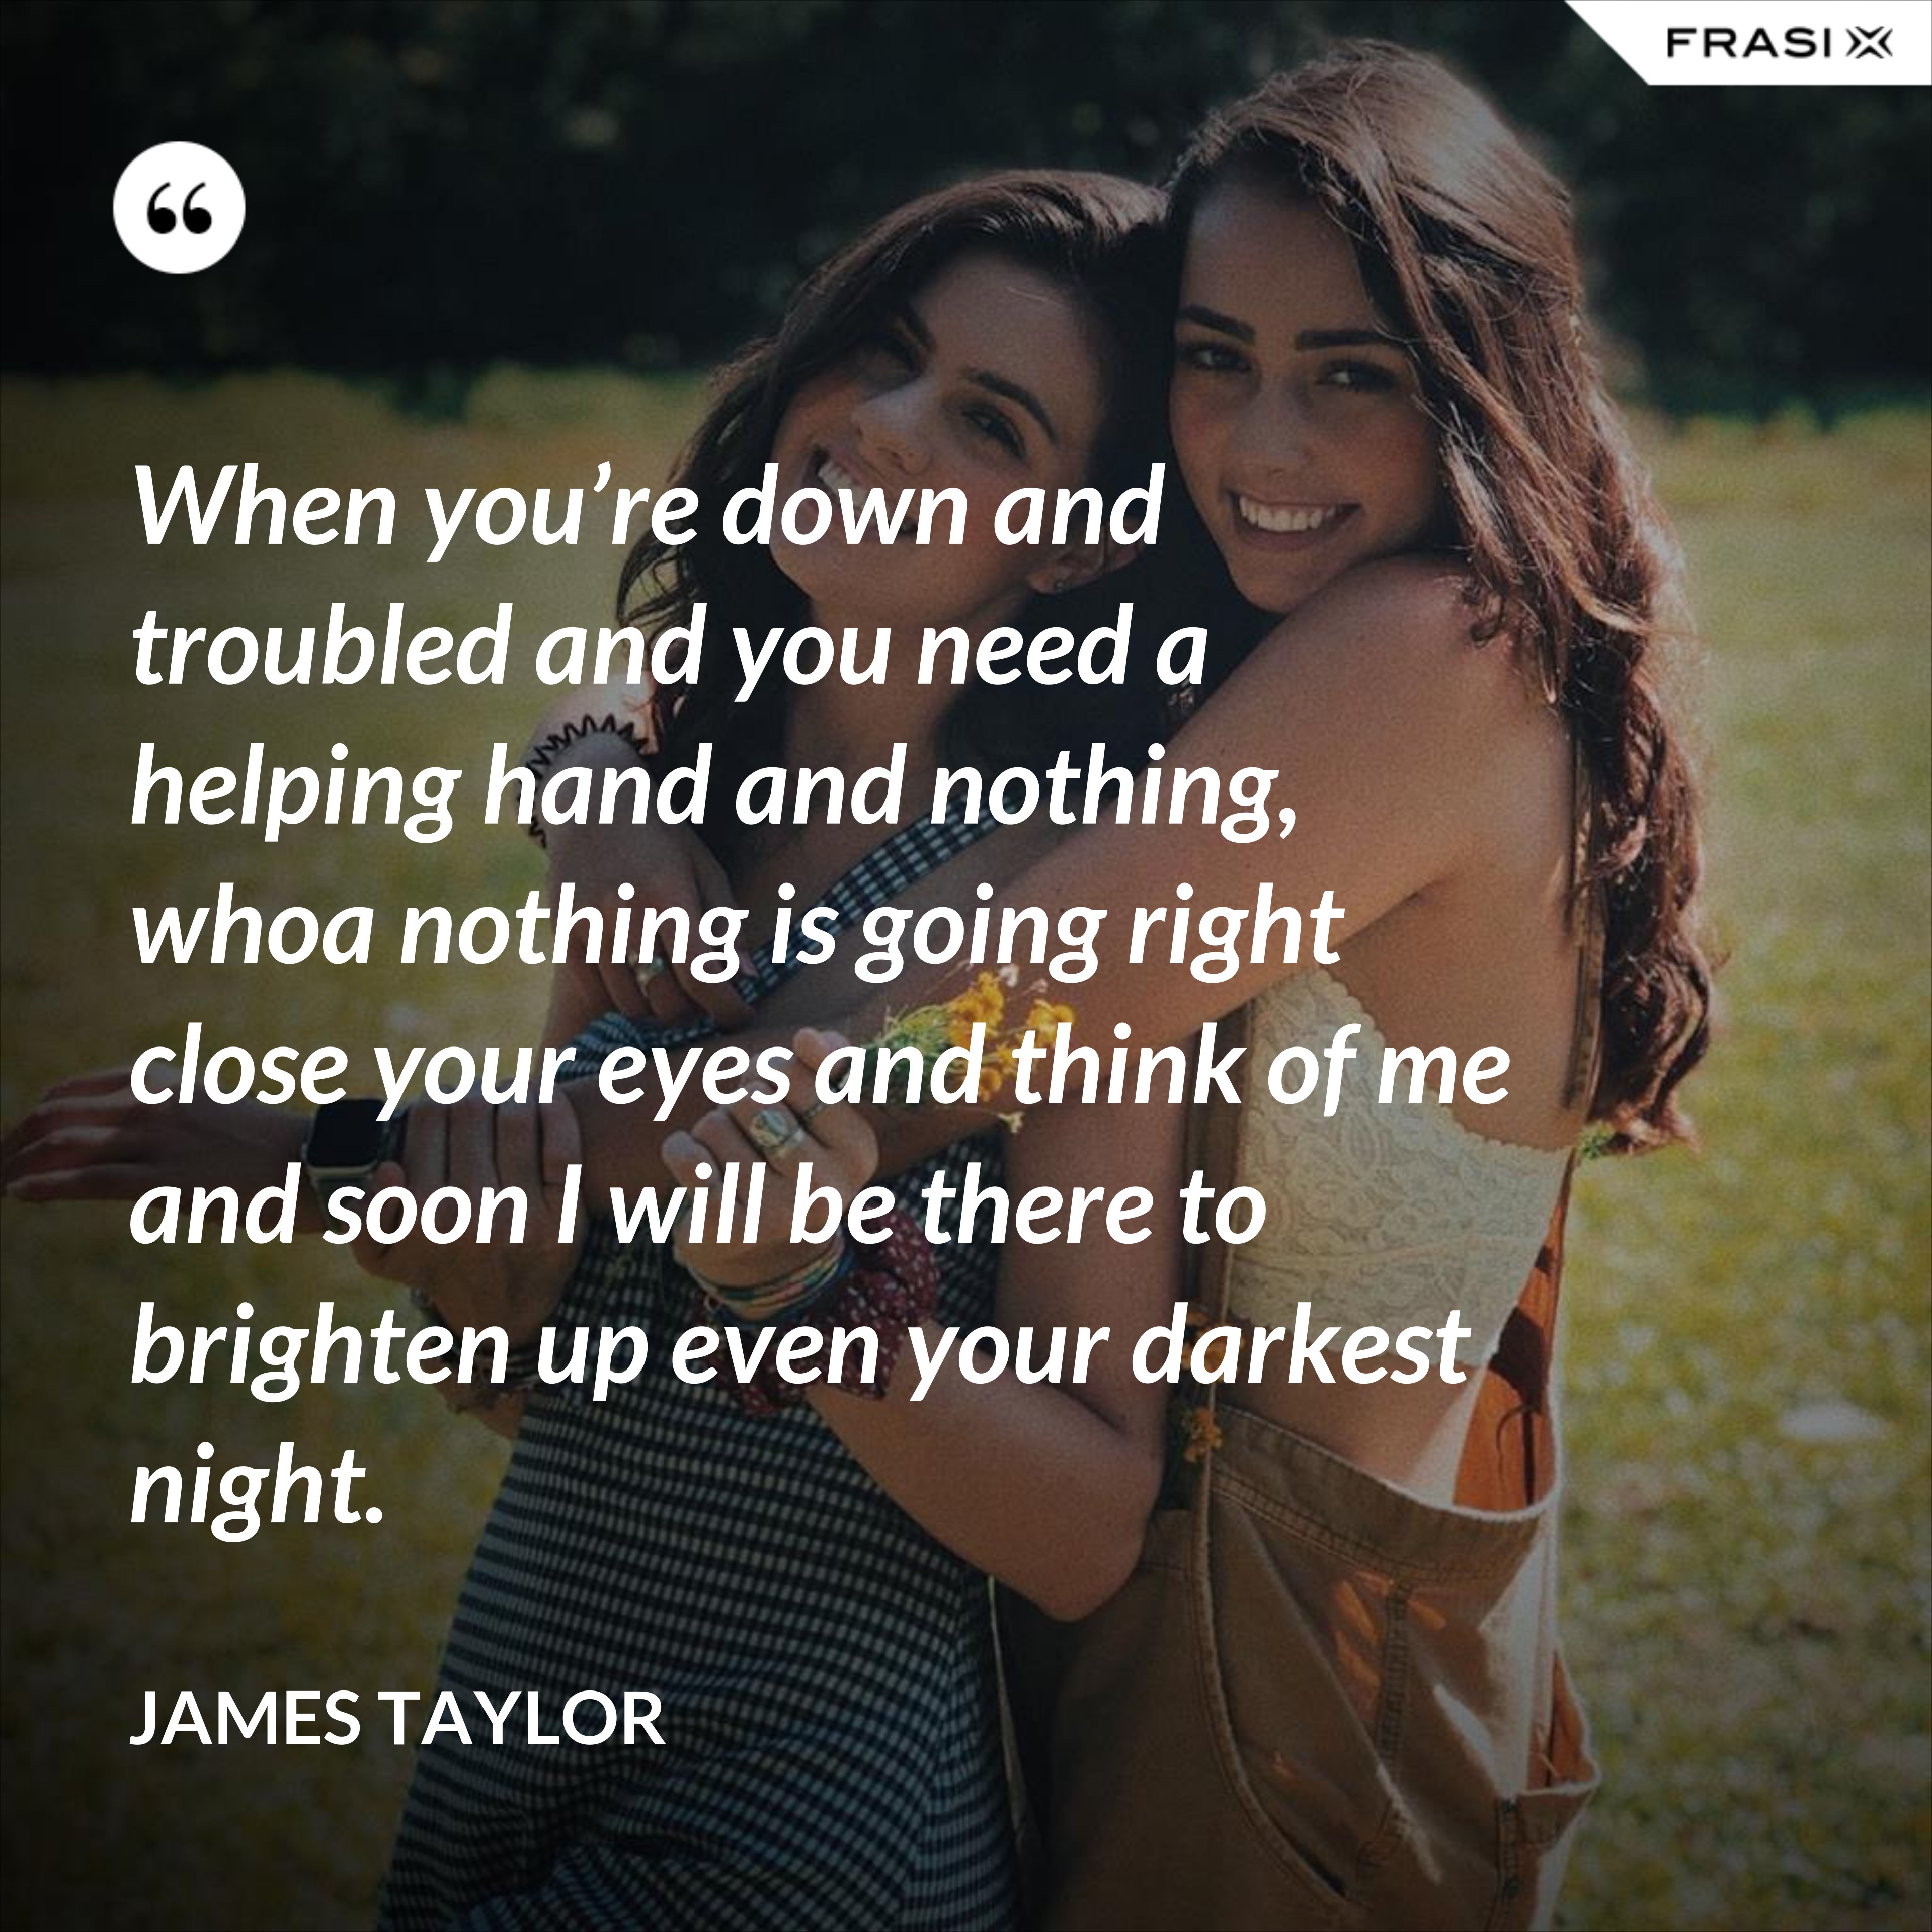 When you’re down and troubled and you need a helping hand and nothing, whoa nothing is going right close your eyes and think of me and soon I will be there to brighten up even your darkest night. - James Taylor